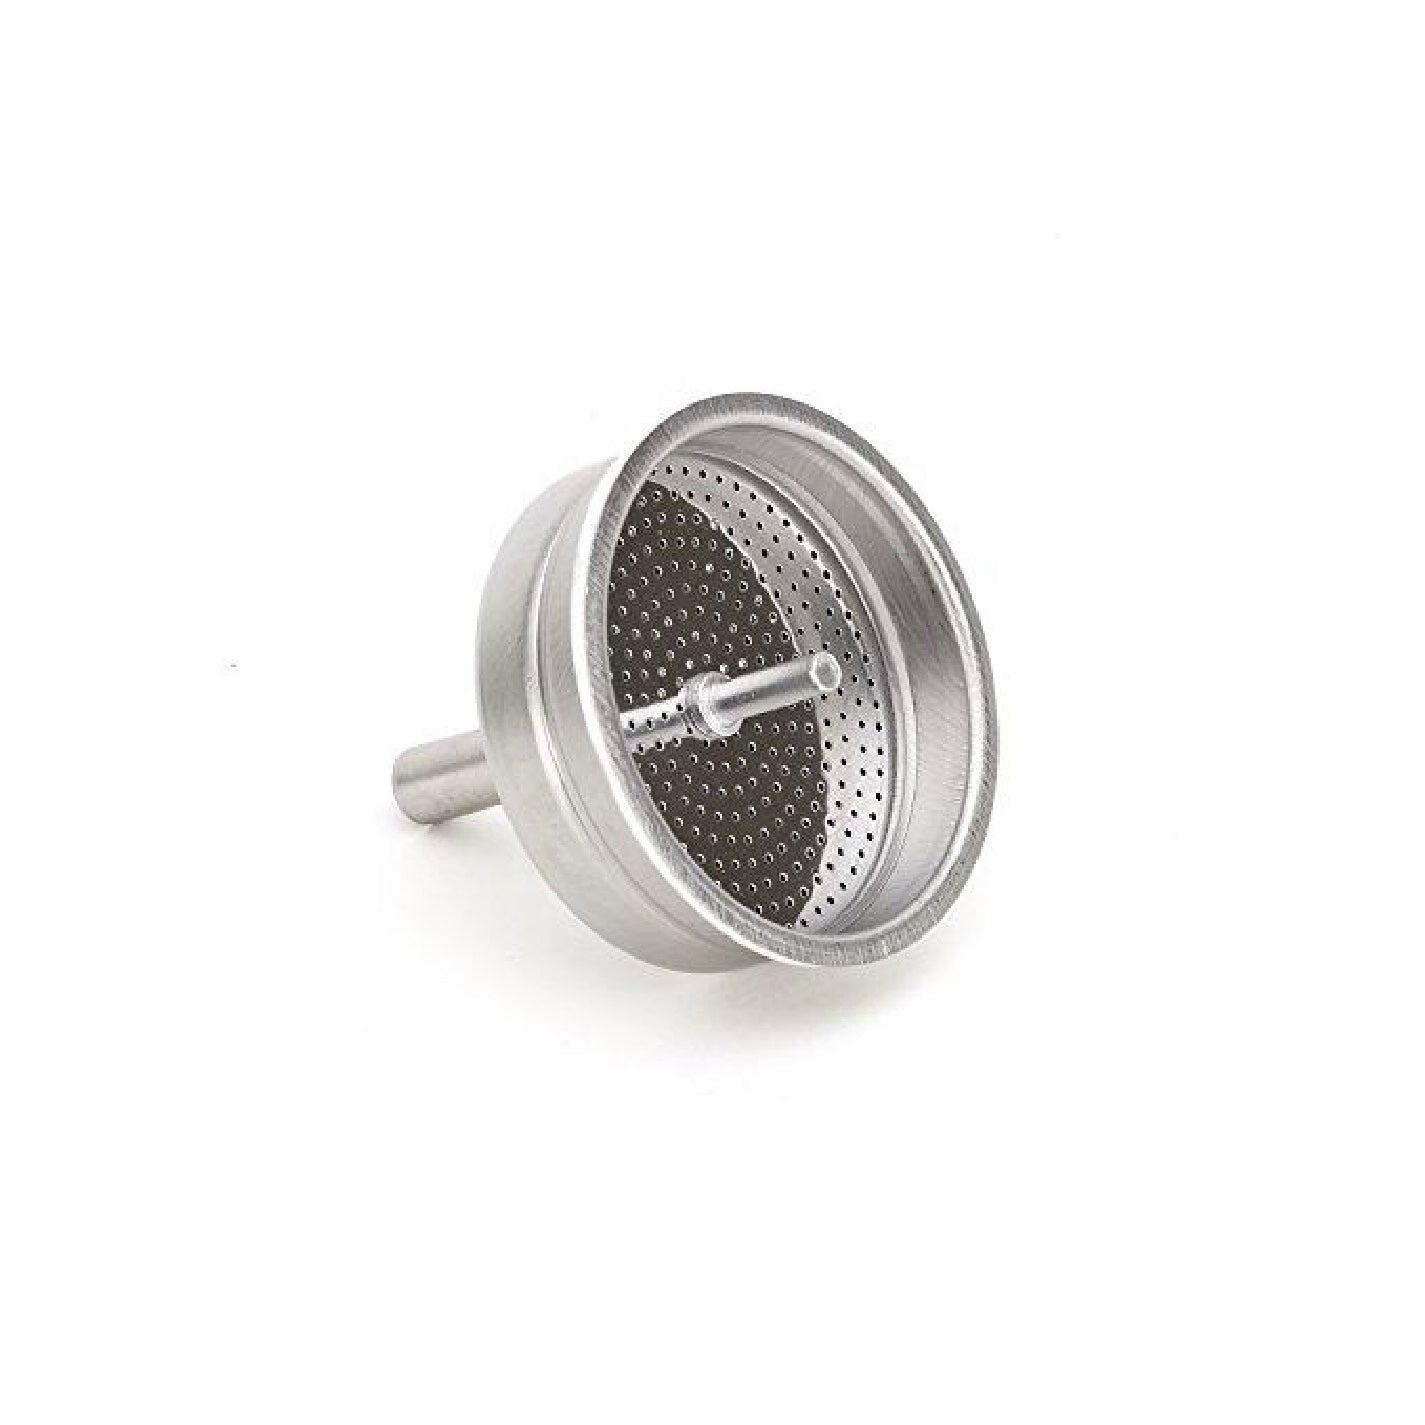 Cuisinox 12 Cup Funnel Filter